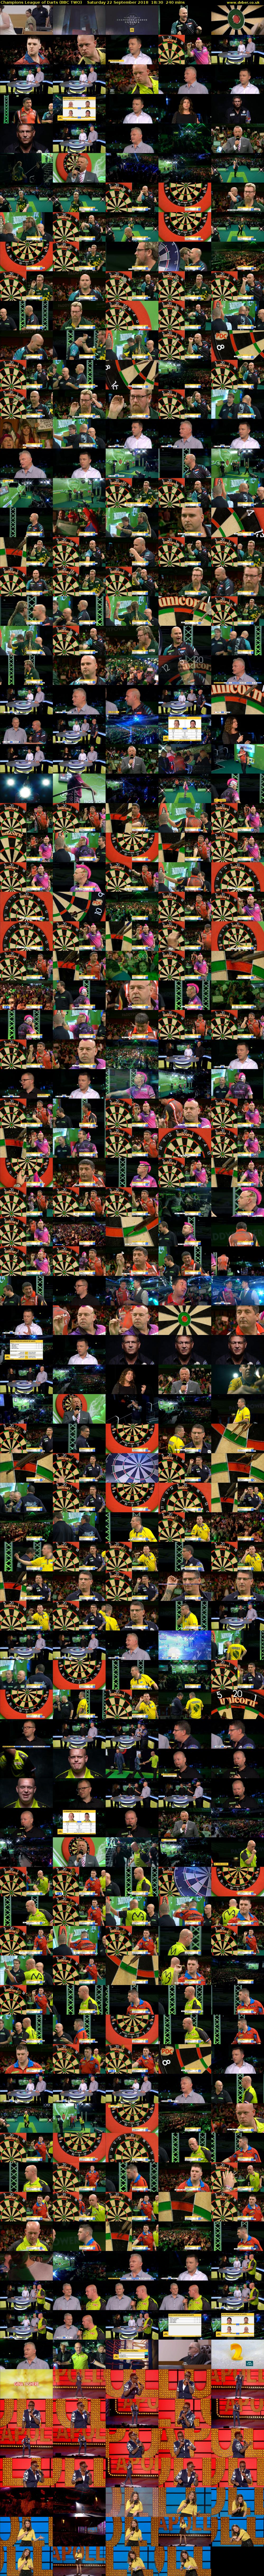 Champions League of Darts (BBC TWO) Saturday 22 September 2018 18:30 - 22:30